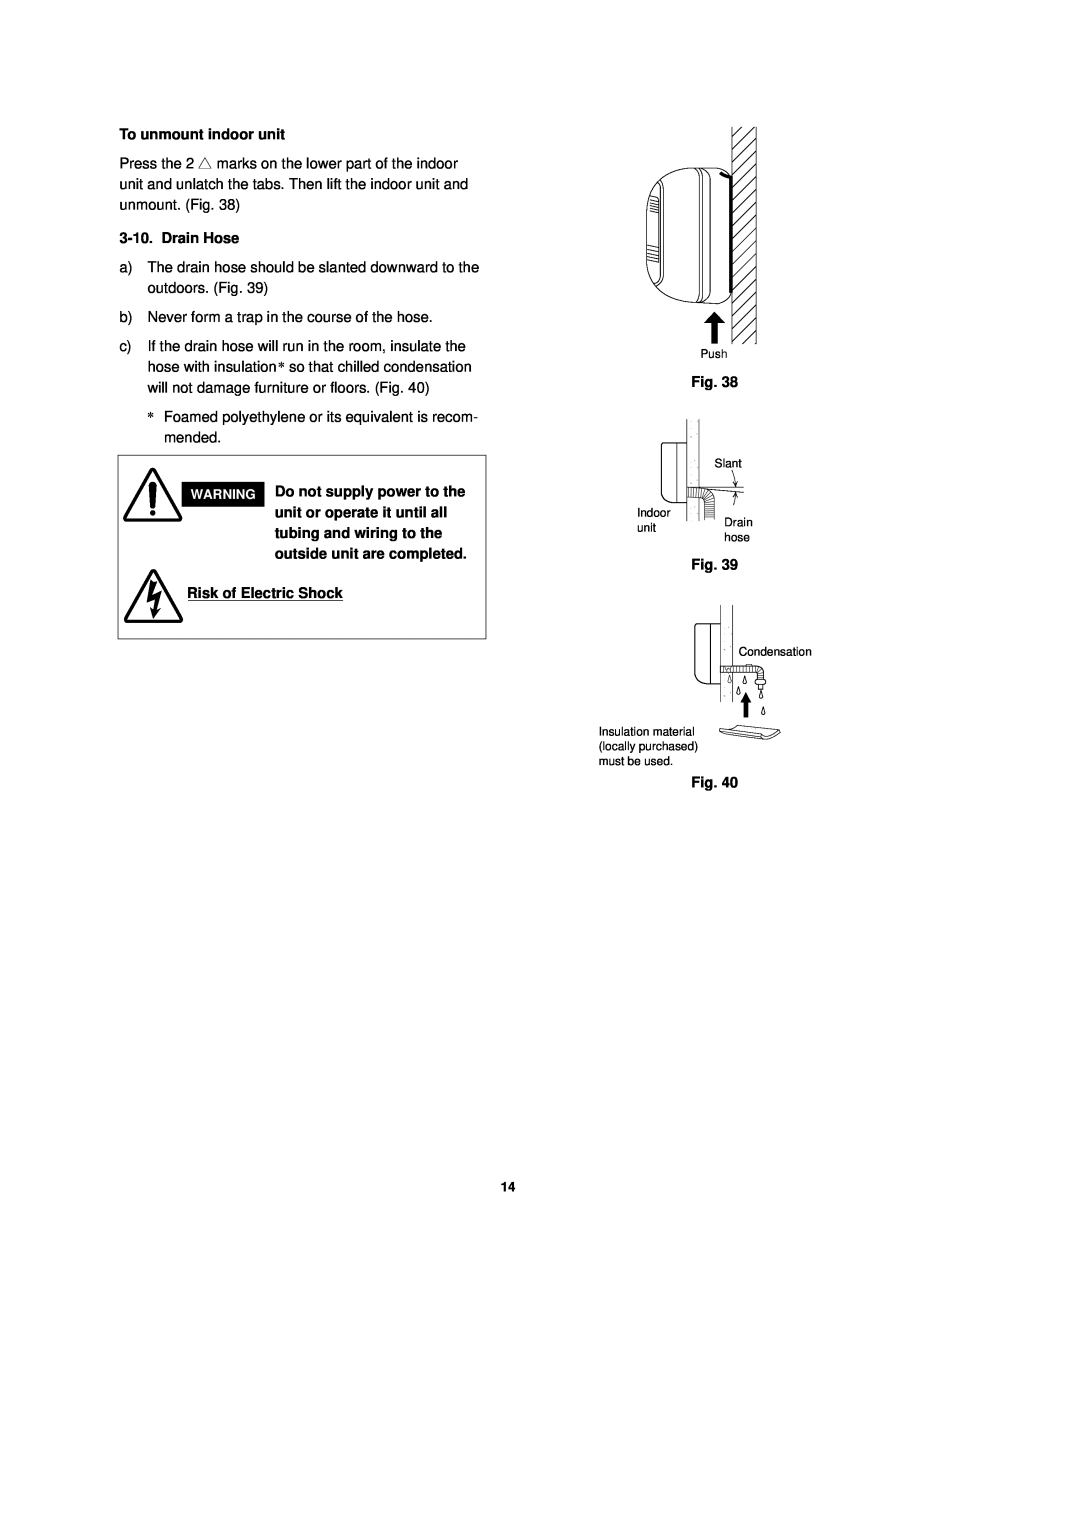 Sanyo CH1251, CH0951 installation instructions To unmount indoor unit, Drain Hose, Risk of Electric Shock 